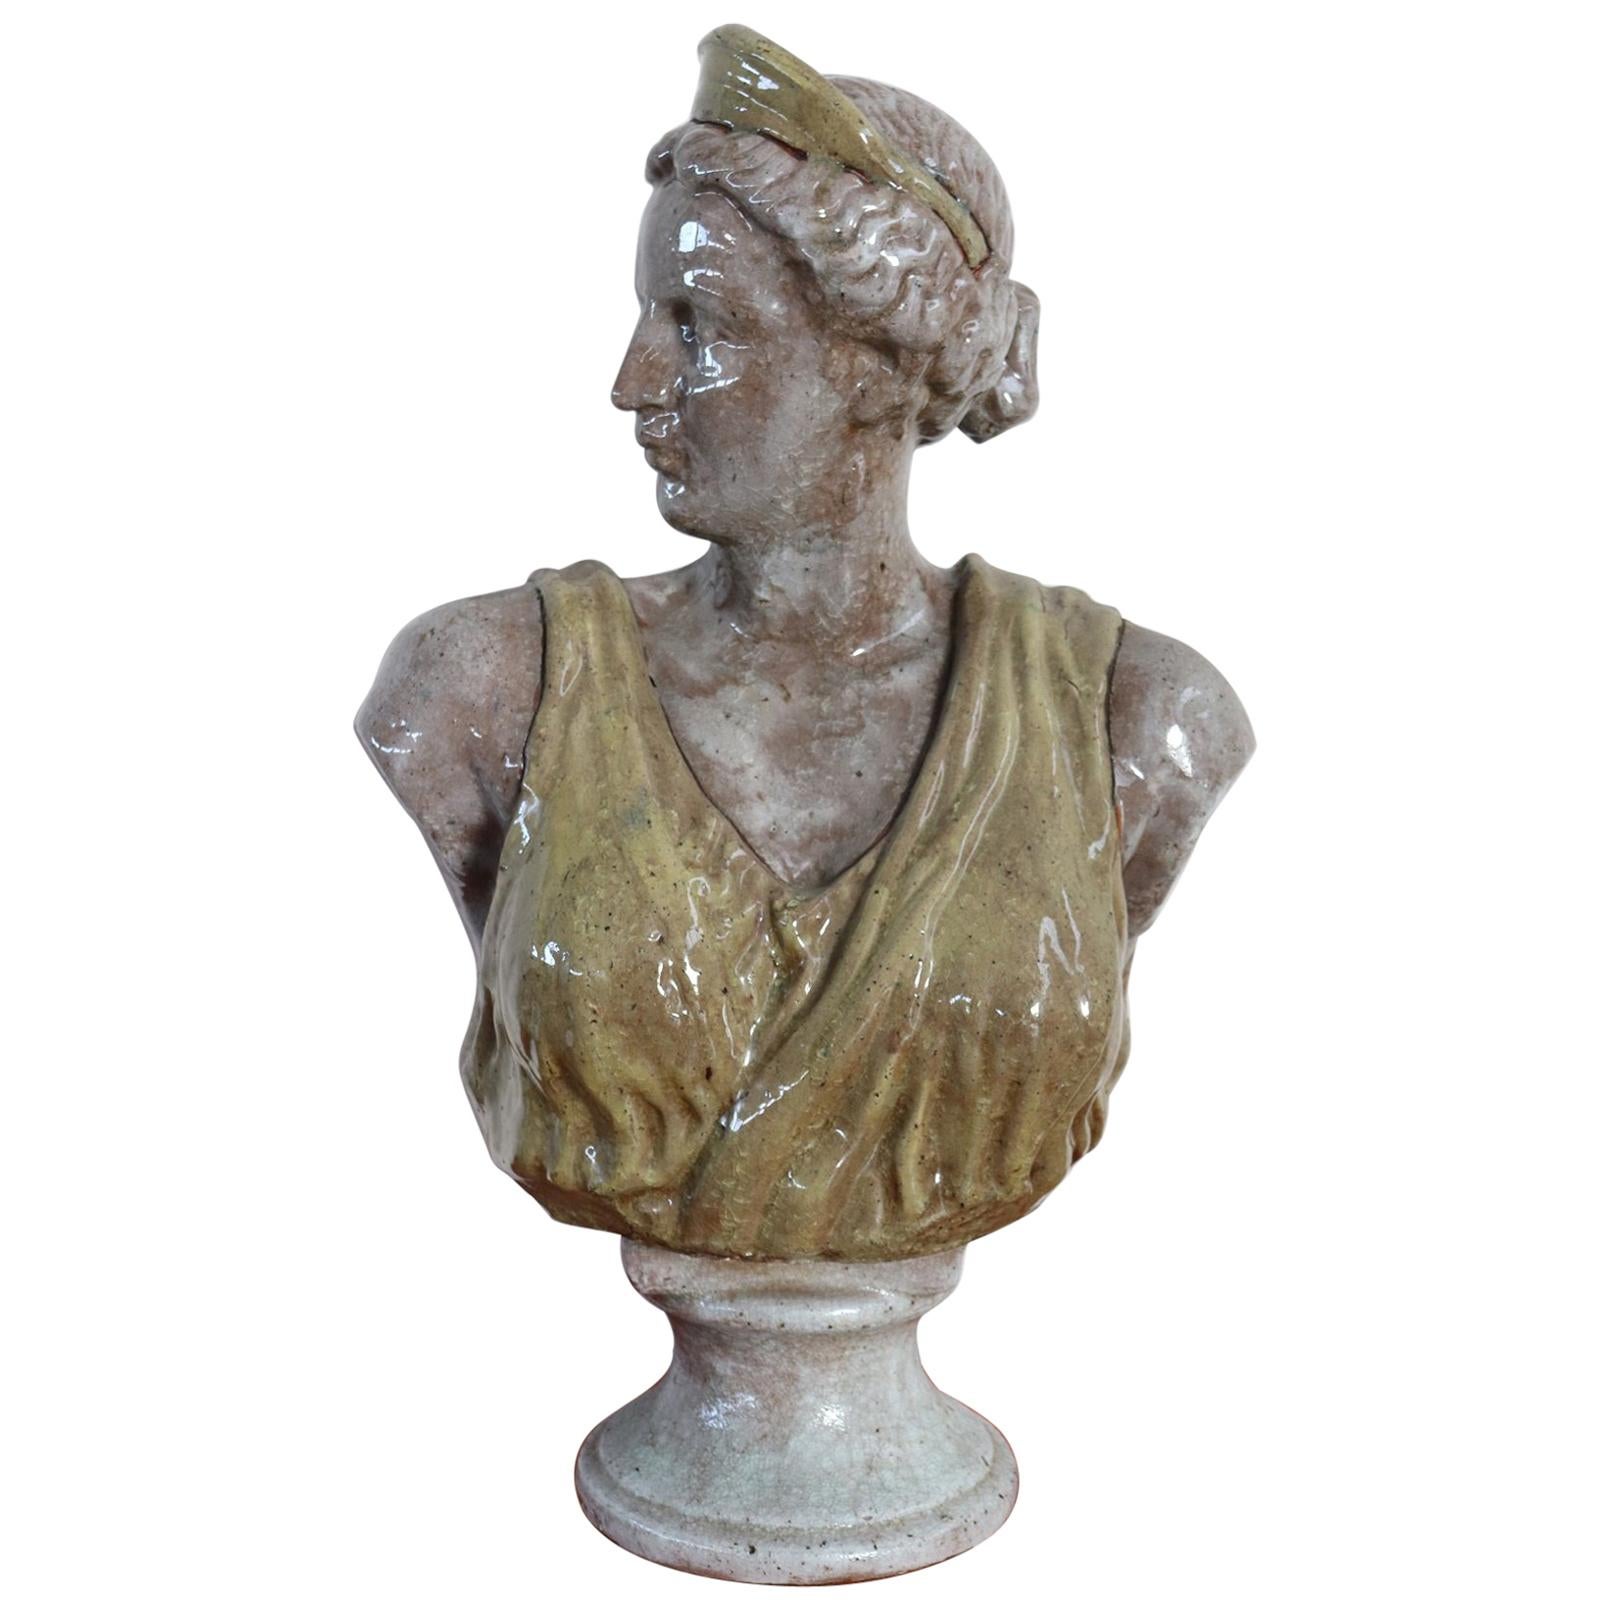 20th Century Italian Sculpture in Glazed Clay Bust of a Roman Woman